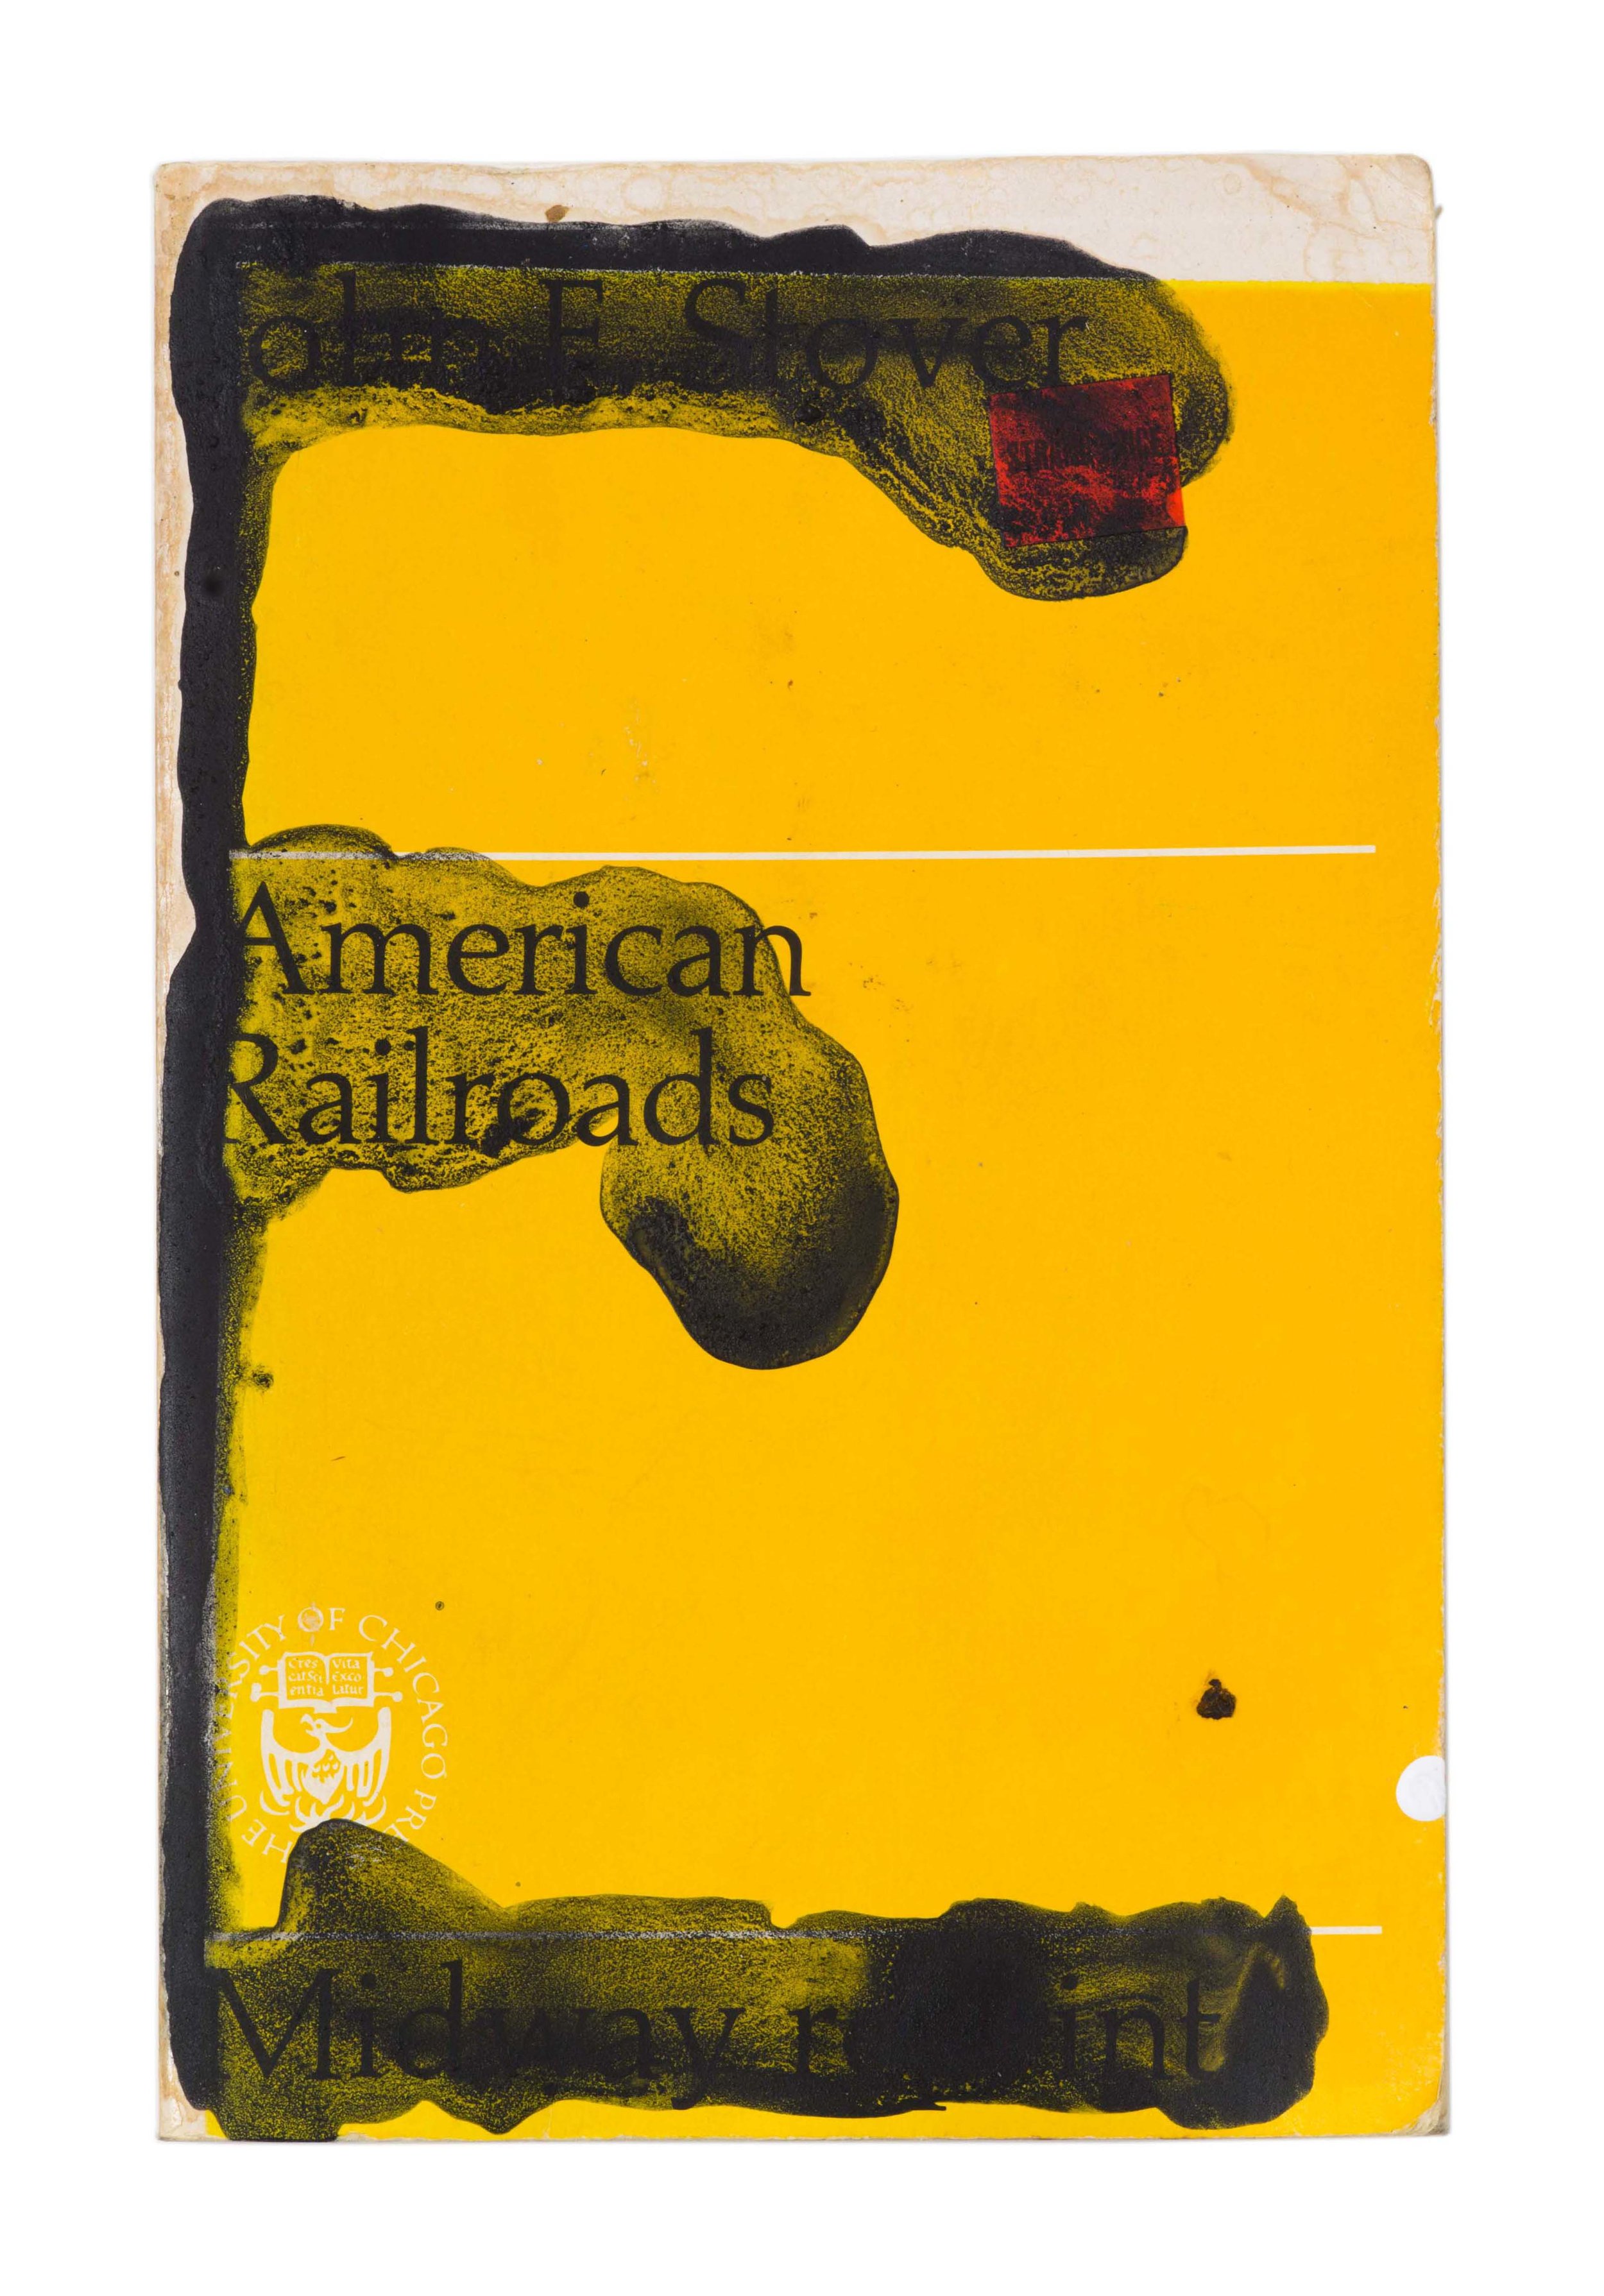  Drew Beattie and Ben Shepard  American Railroads   acrylic on used book 2016 8 ½ x 5 ½ inches 